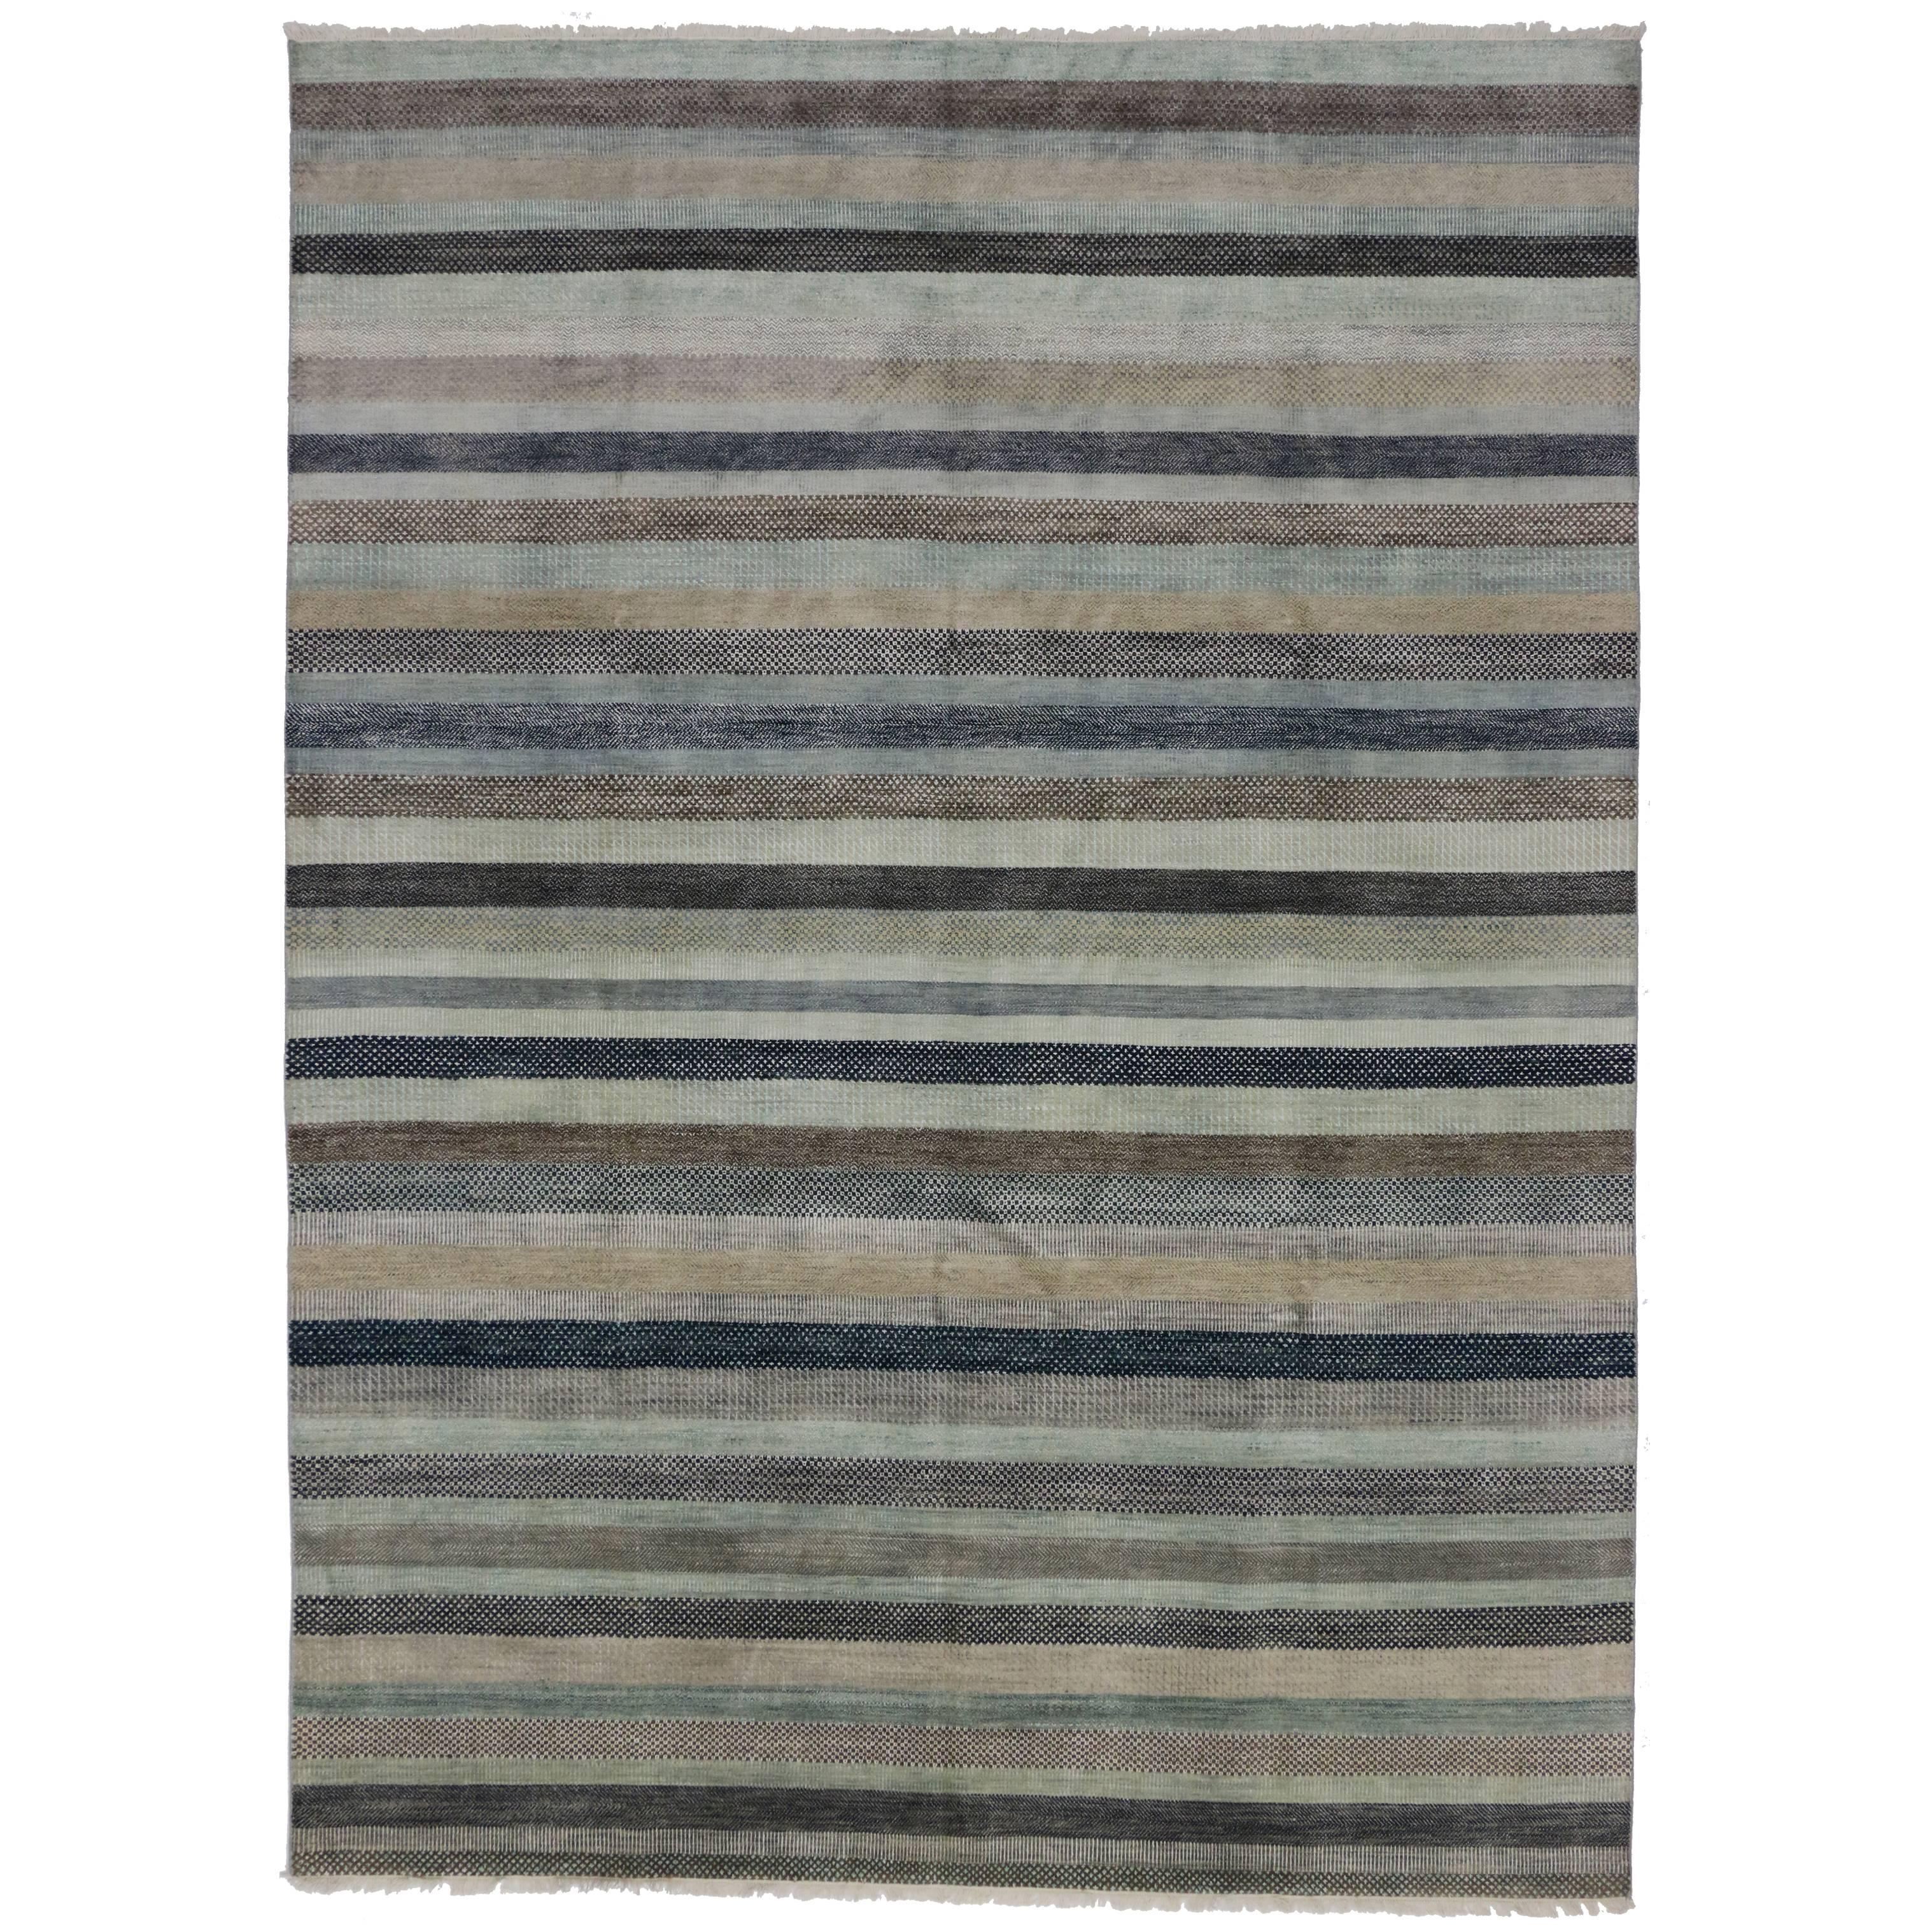 New Transitional Striped Area Rug with Nautical, Coastal Cape Cod Style